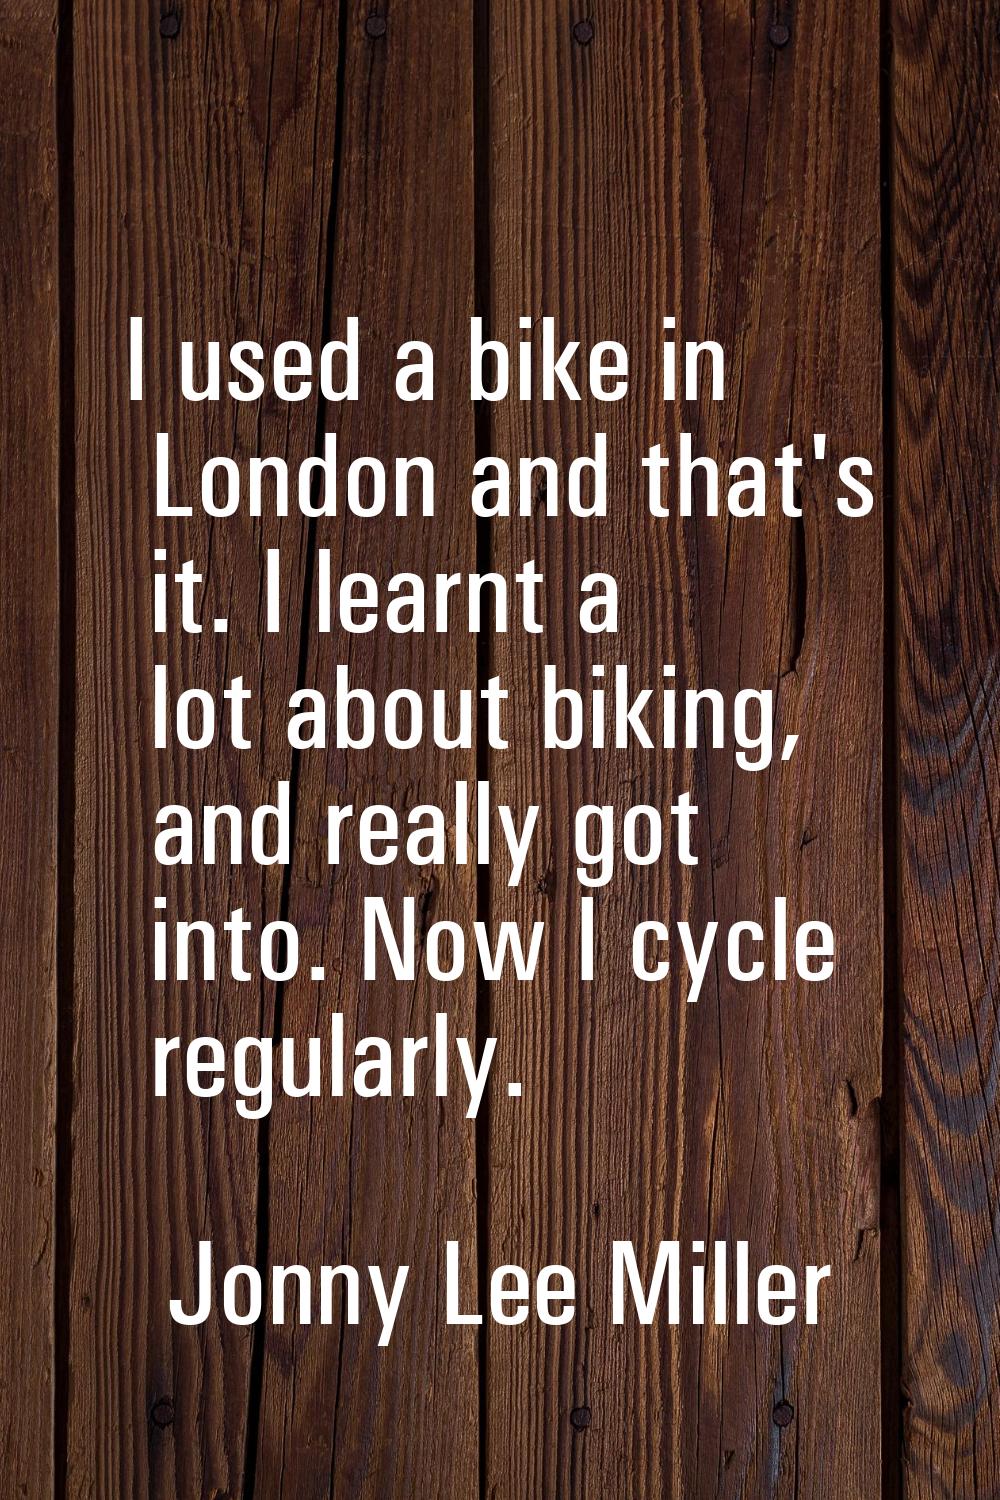 I used a bike in London and that's it. I learnt a lot about biking, and really got into. Now I cycl